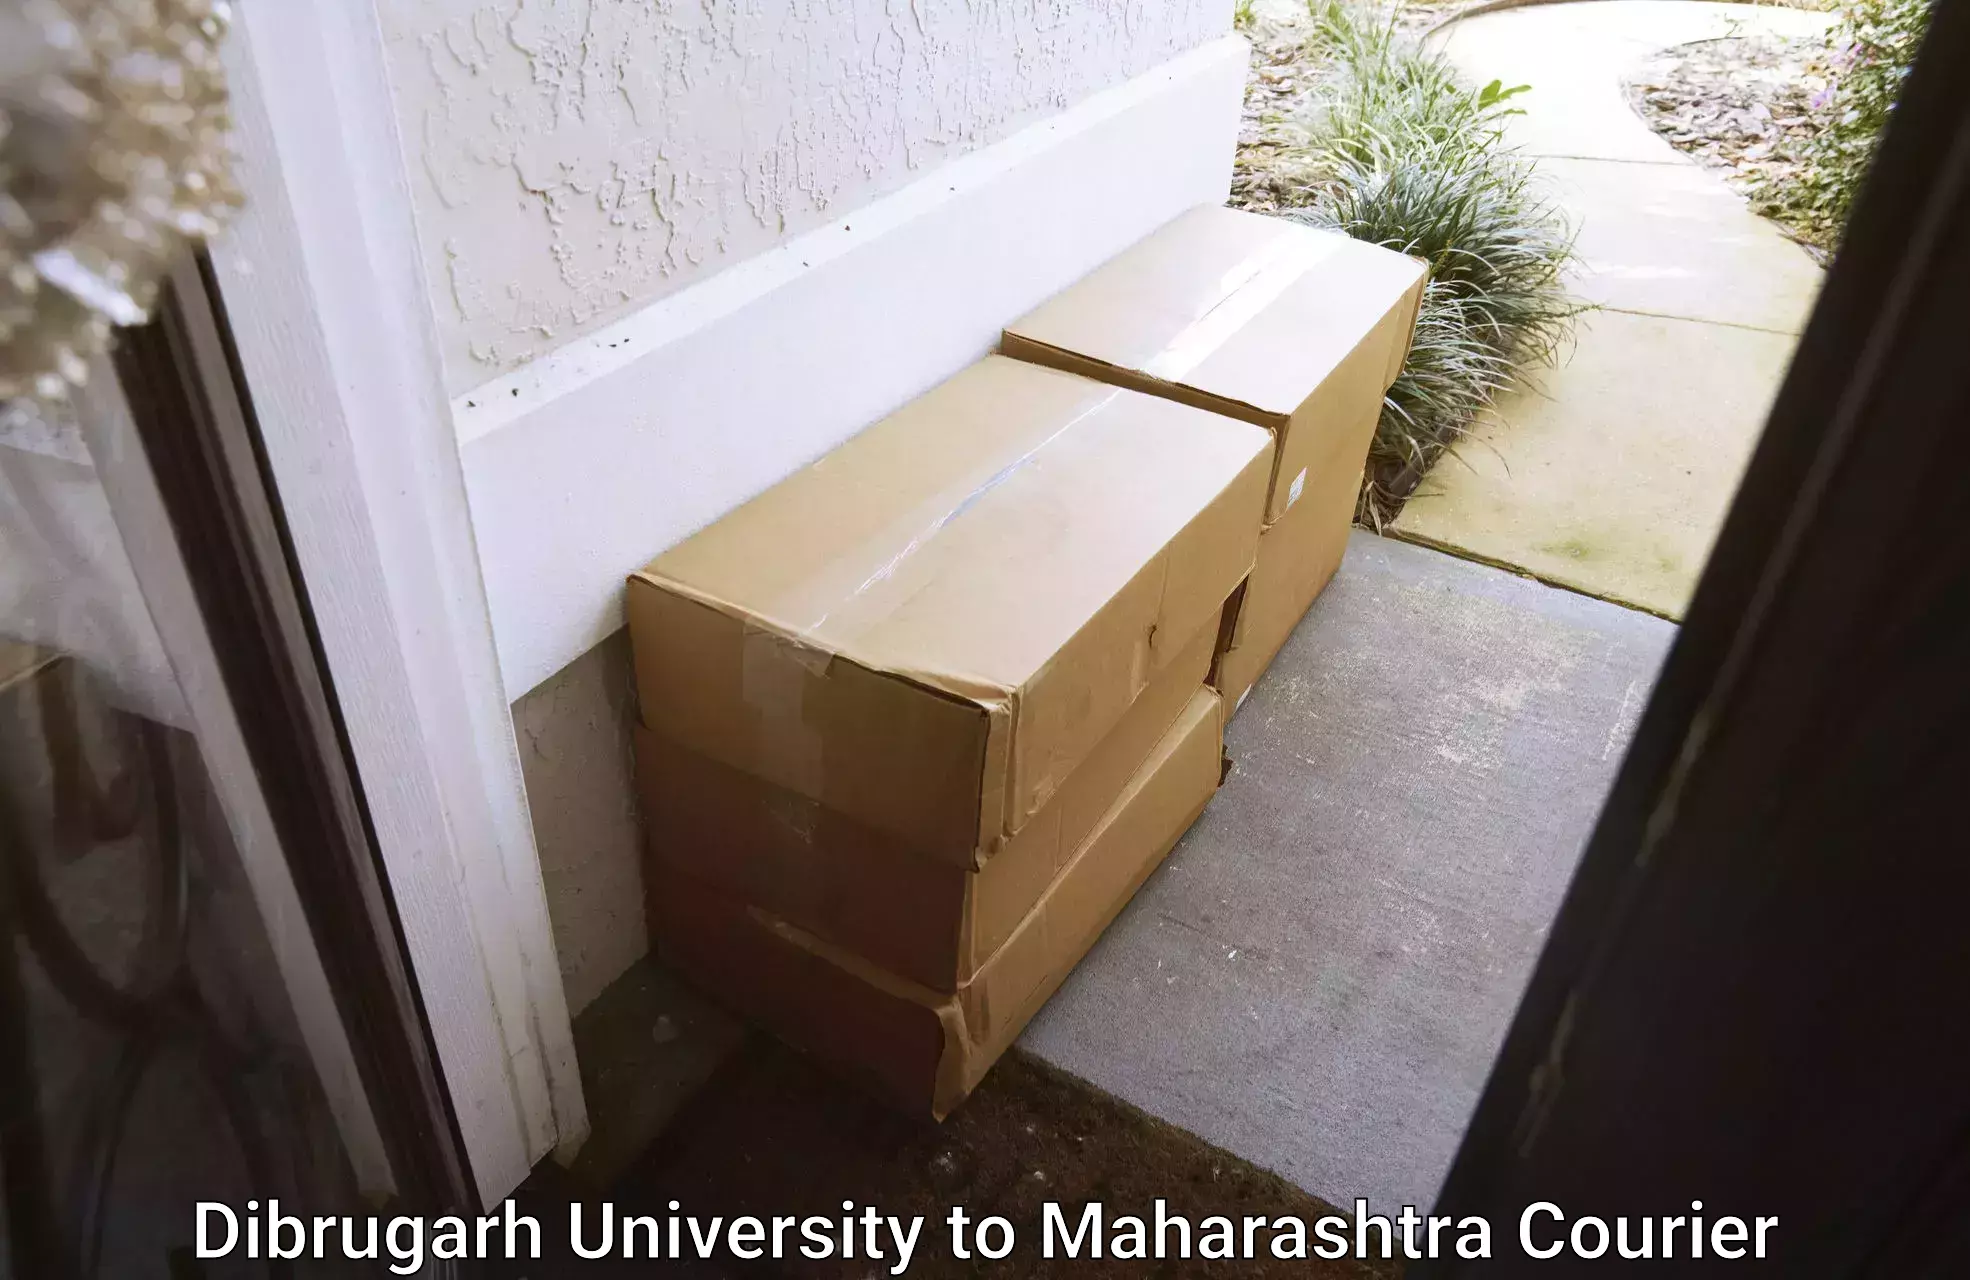 Package delivery network in Dibrugarh University to Maharashtra